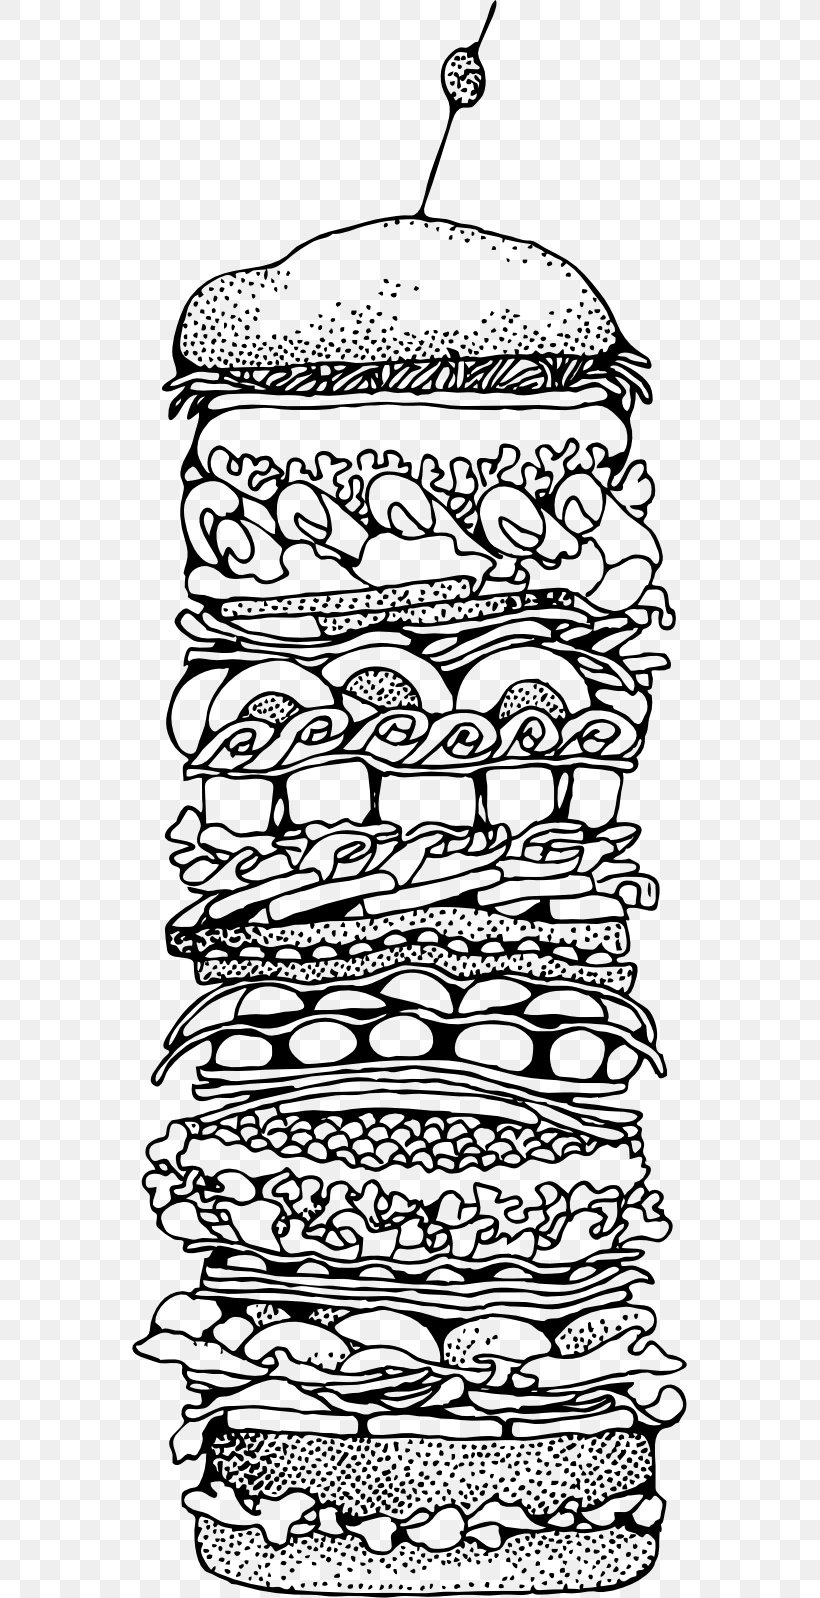 Hamburger Peanut Butter And Jelly Sandwich Submarine Sandwich Clip Art, PNG, 555x1598px, Hamburger, Area, Black And White, Cheese, Drawing Download Free